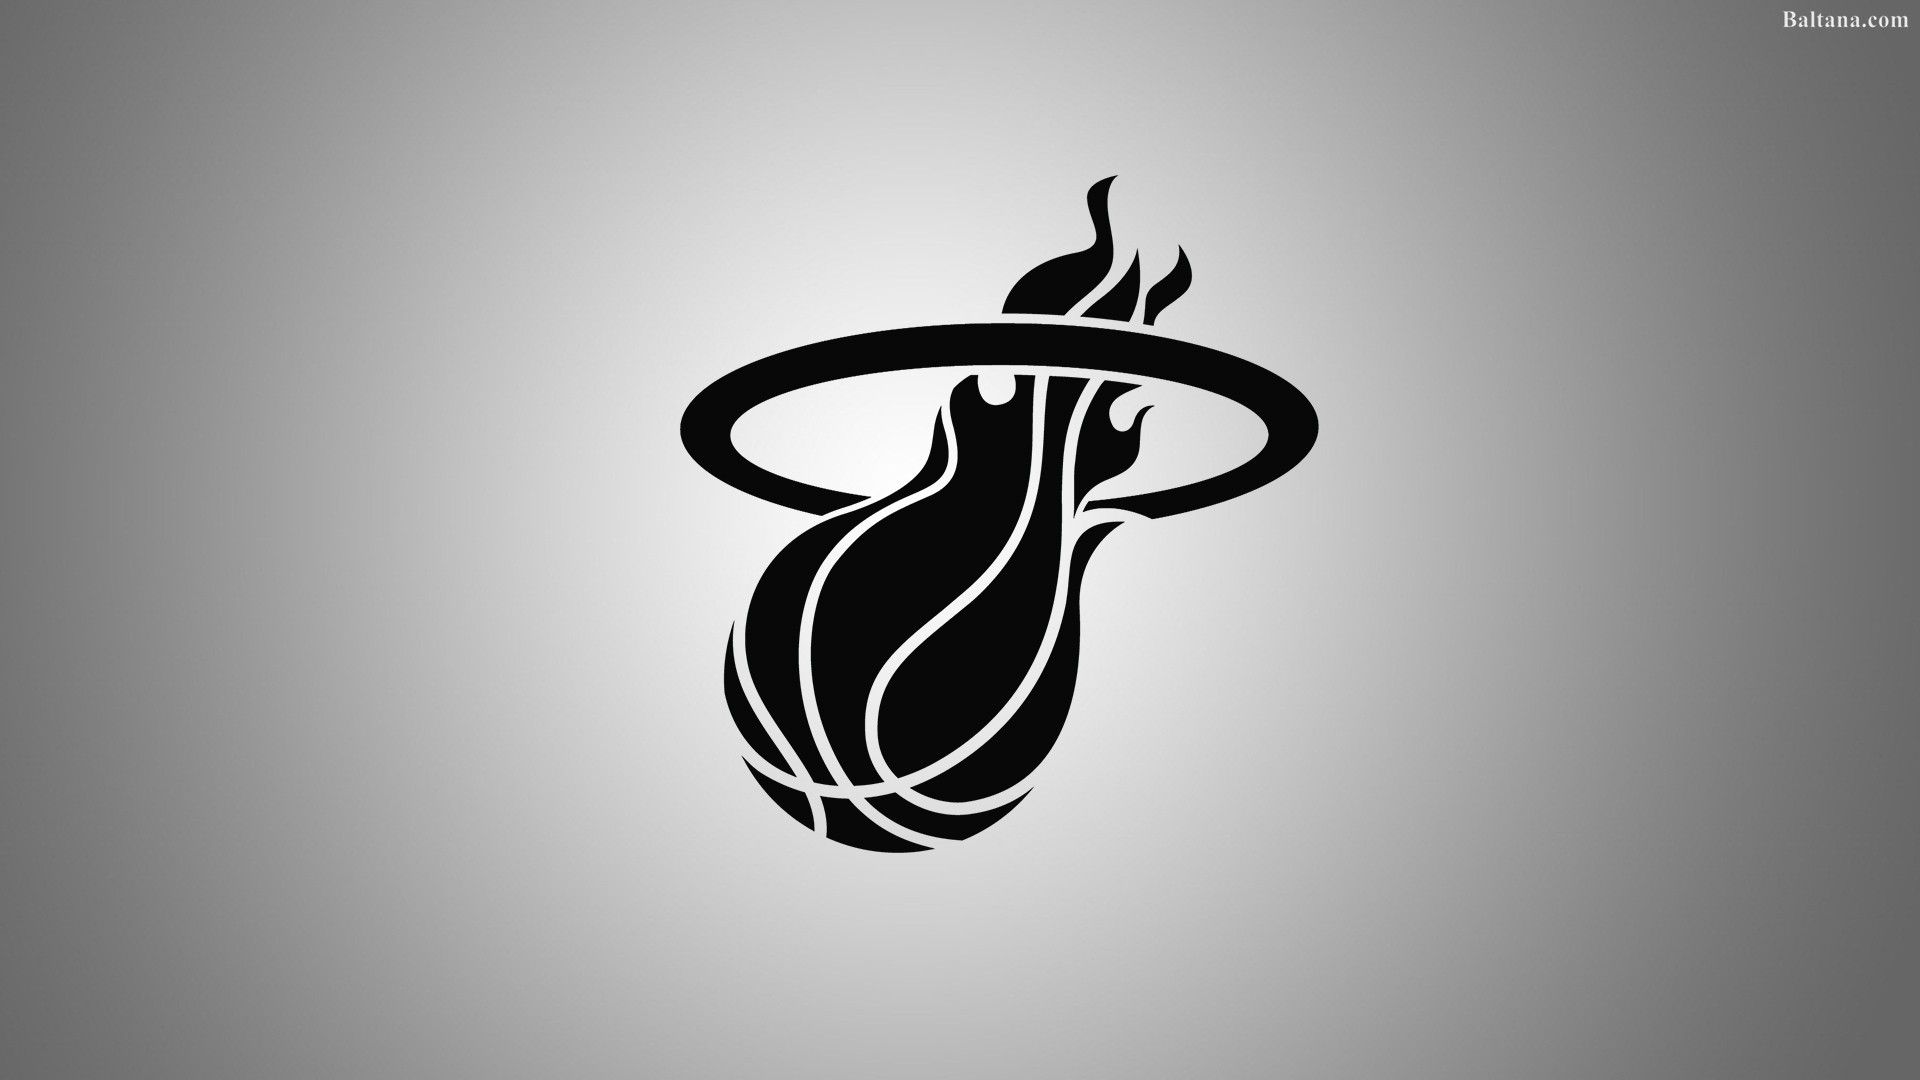 I made a phone wallpaper for every NBA team here is the one I made for the  Heat hope yall enjoy it  rheat